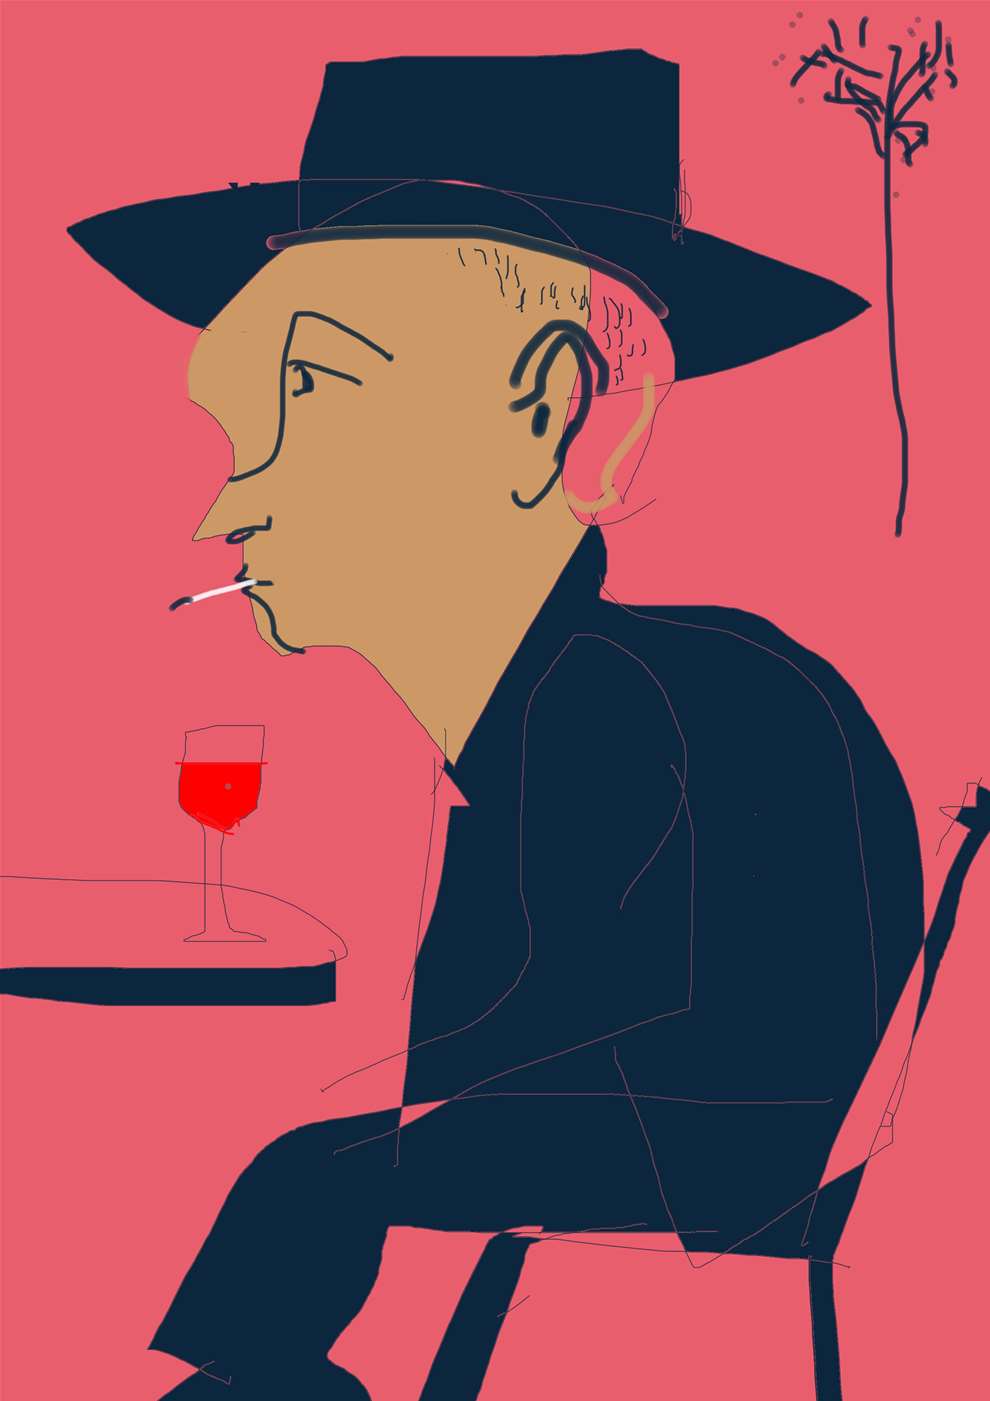 Brian Grimwood, Bold minimal portrait of a man in a hat smoking and drink a glass of wine. On pink background.  